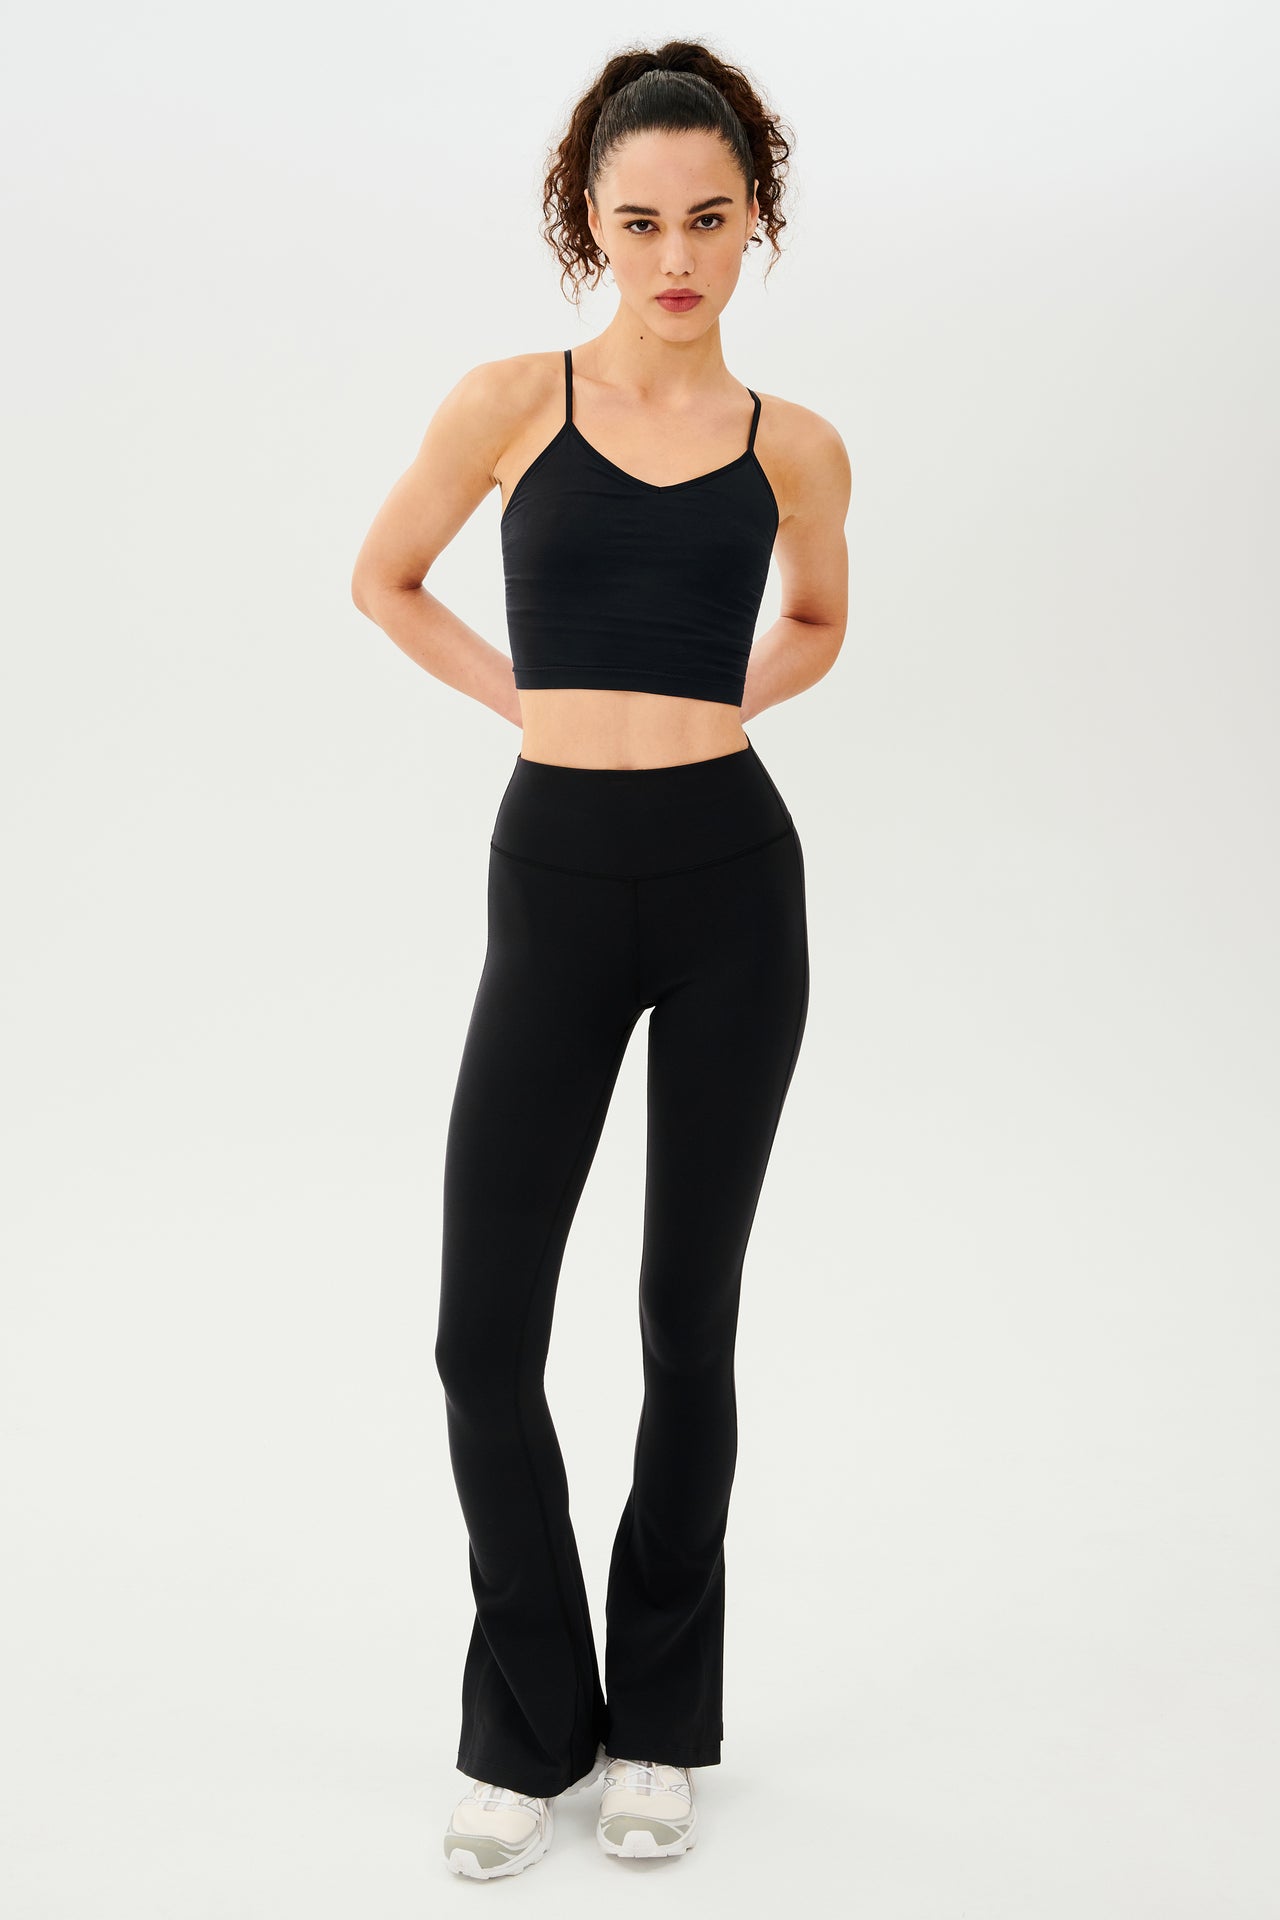 A woman wearing Raquel High Waist Flare w/ Split Hem - Black leggings and a black crop top made from 4-way stretch supplex fabric, perfect for gym workouts.